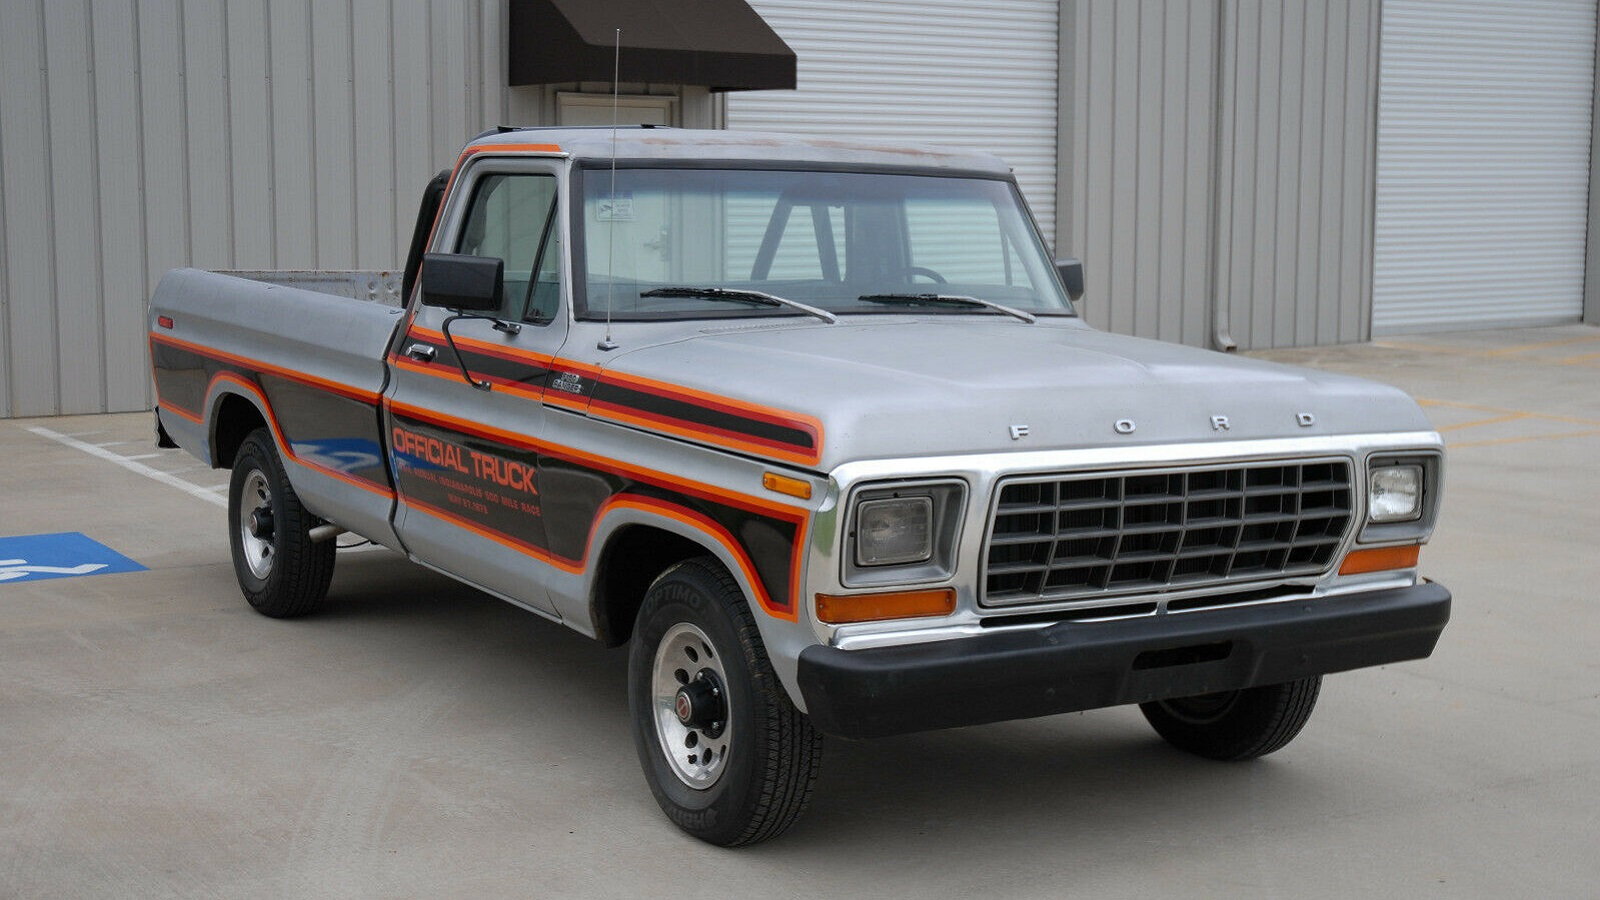 rare 1979 ford f 150 indy speedway truck pops up for sale ford trucks rare 1979 ford f 150 indy speedway